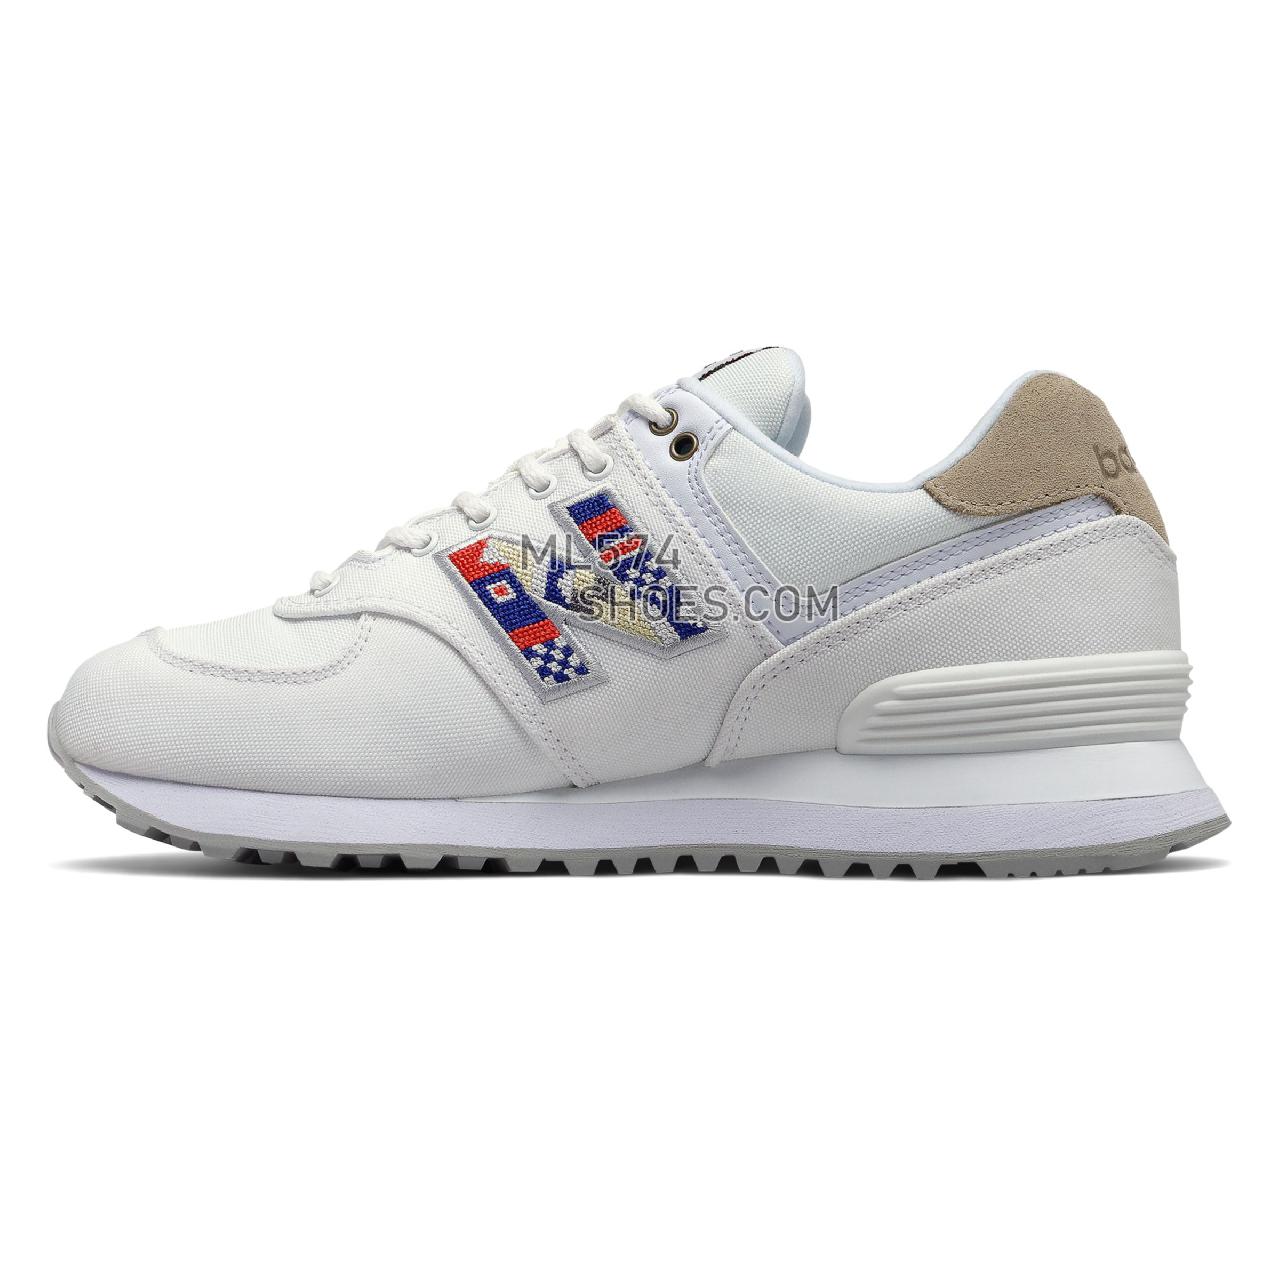 New Balance 574 - Women's Classic Sneakers - White with Incense - WL574SOD